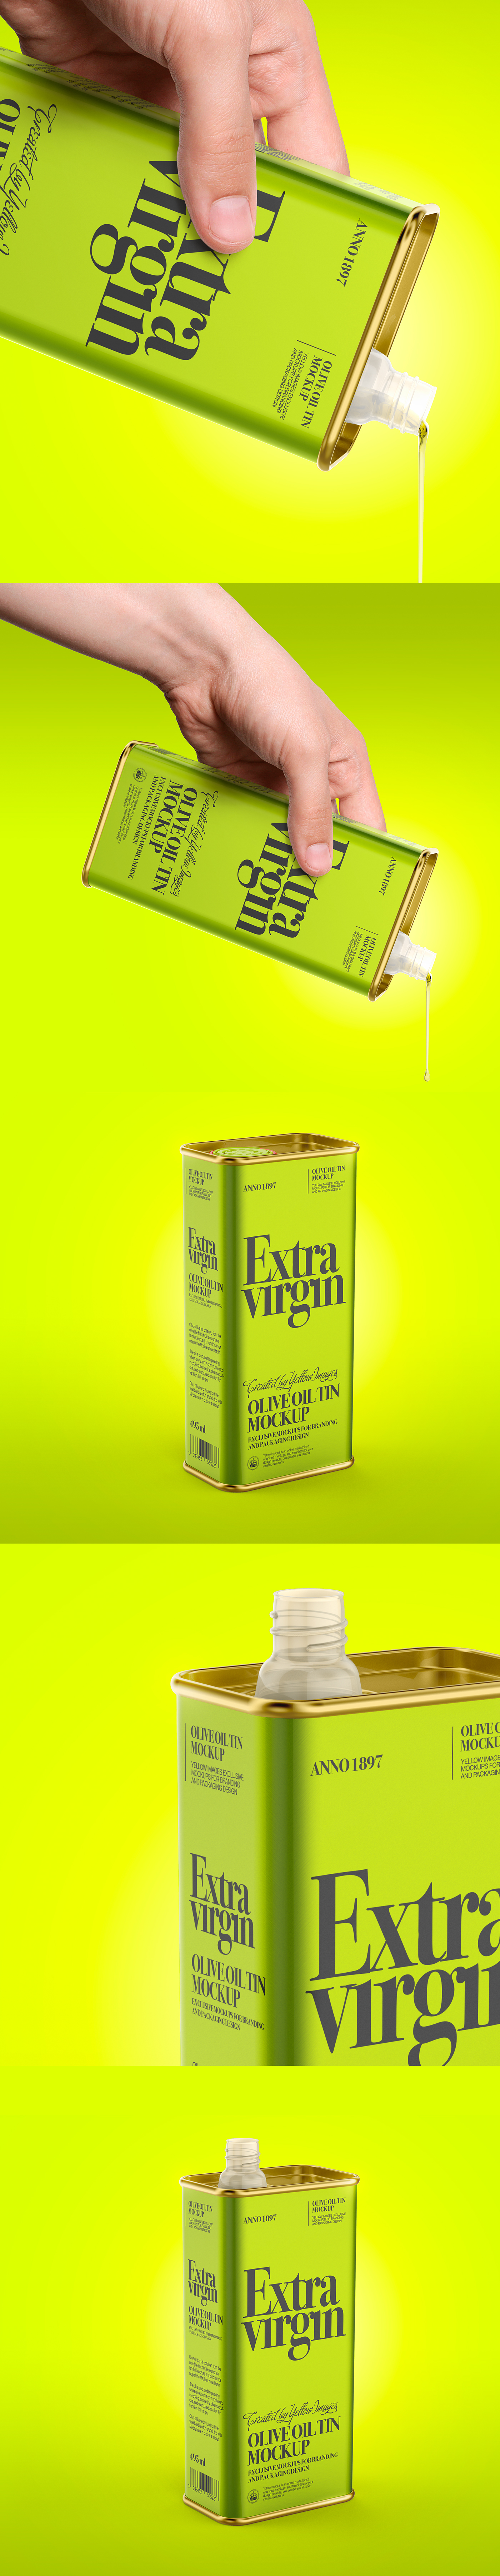 Download Olive Oil Tin Can Mockup in Packaging Mockups on Yellow Images Creative Store